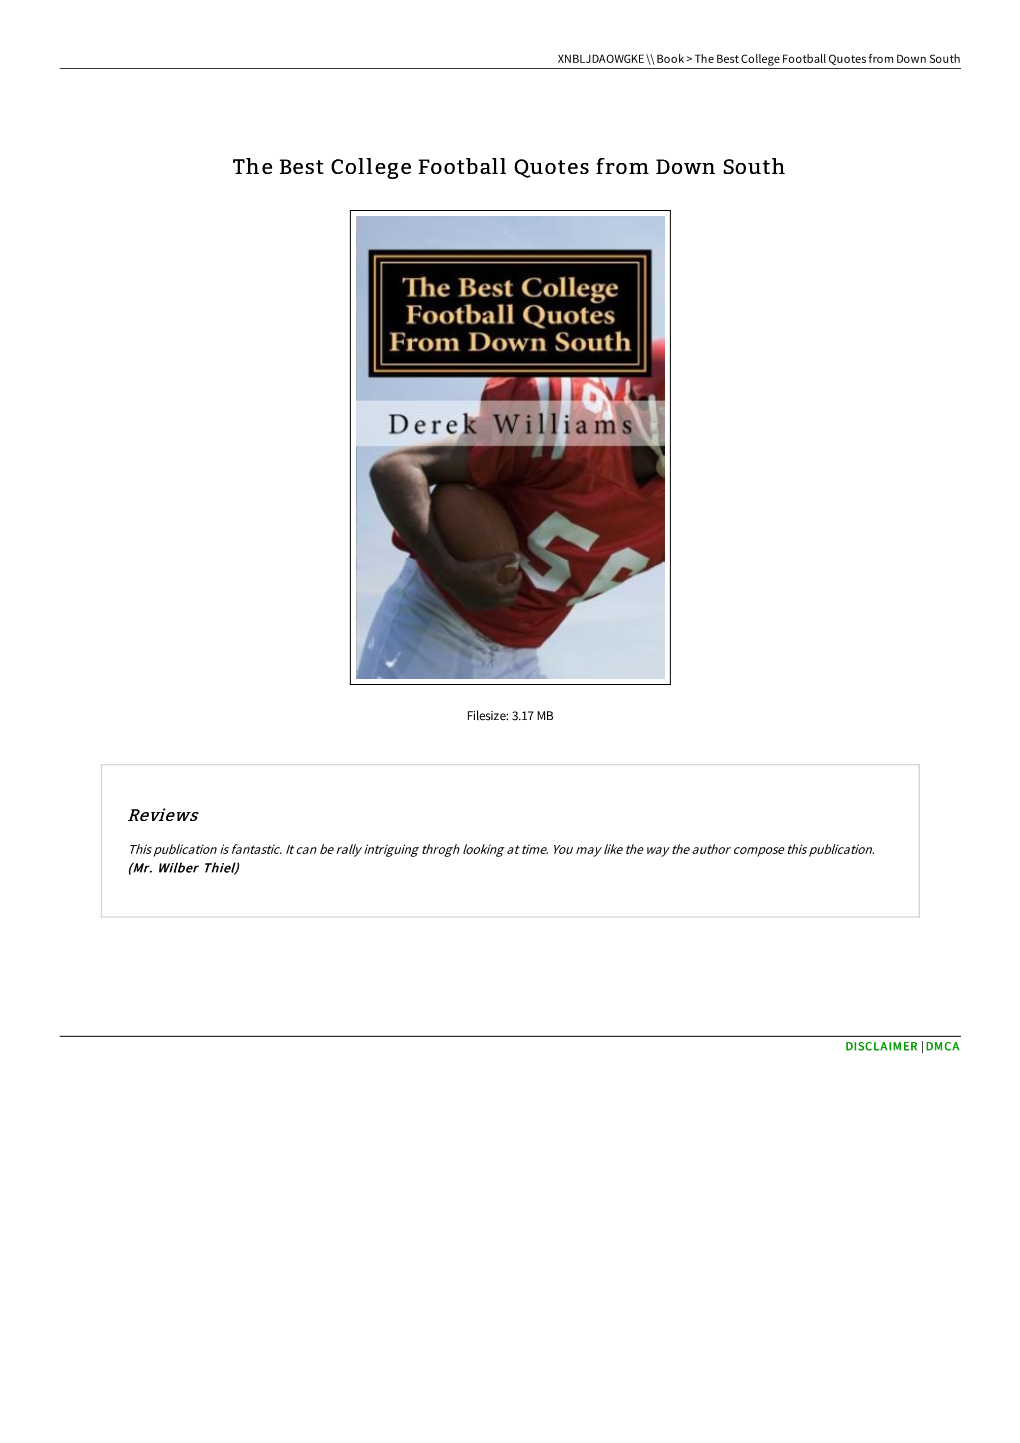 Download Ebook // the Best College Football Quotes from Down